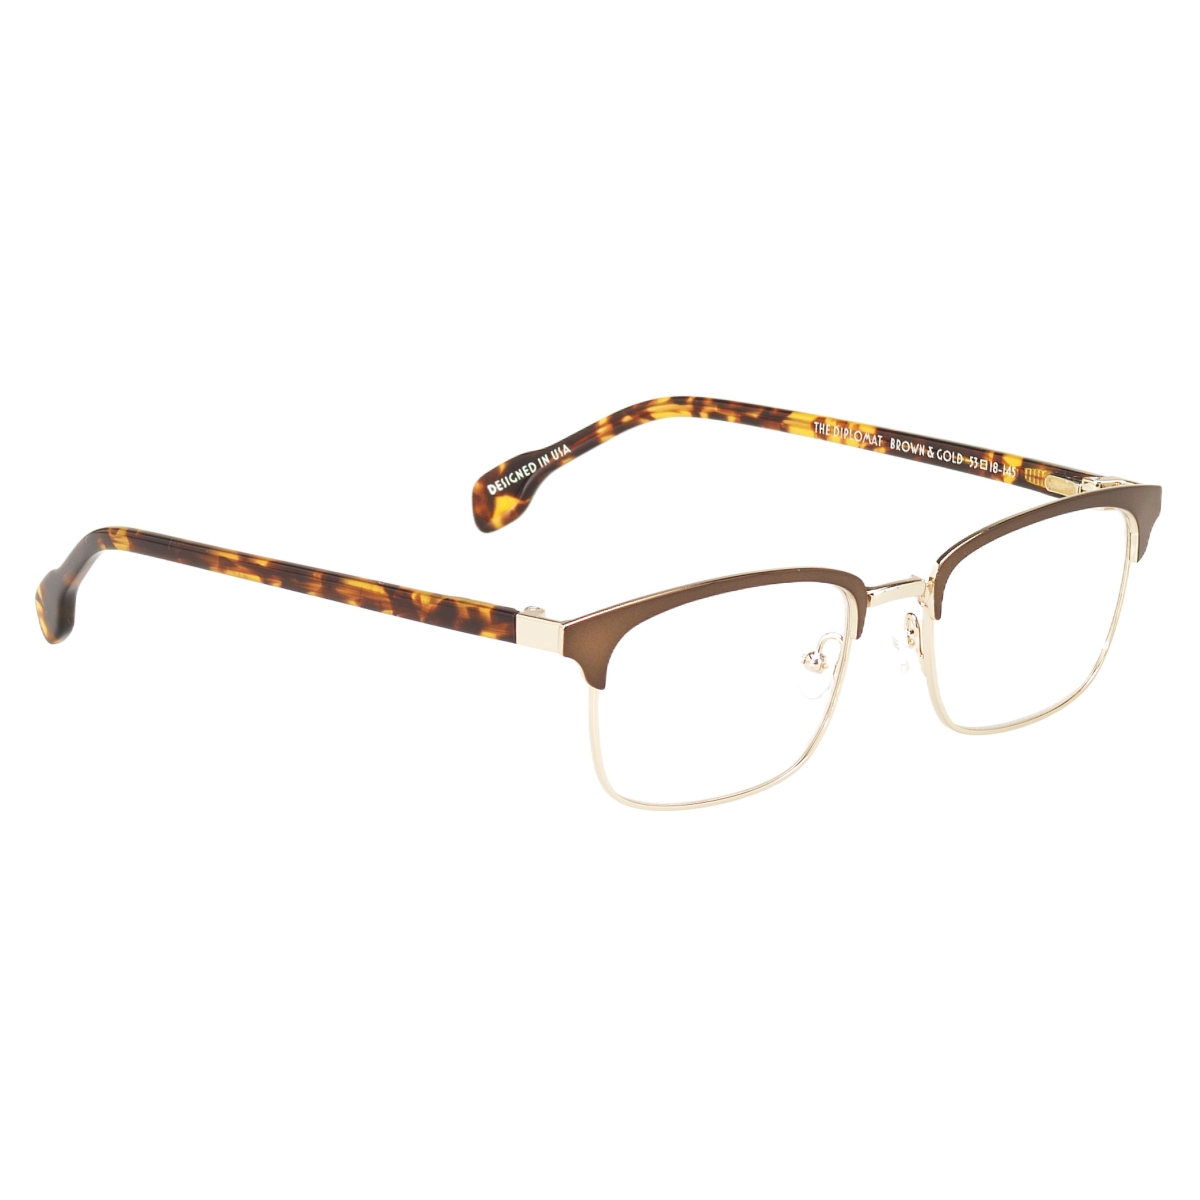 Sugar Specs - The Diplomat 03 Brown and Gold